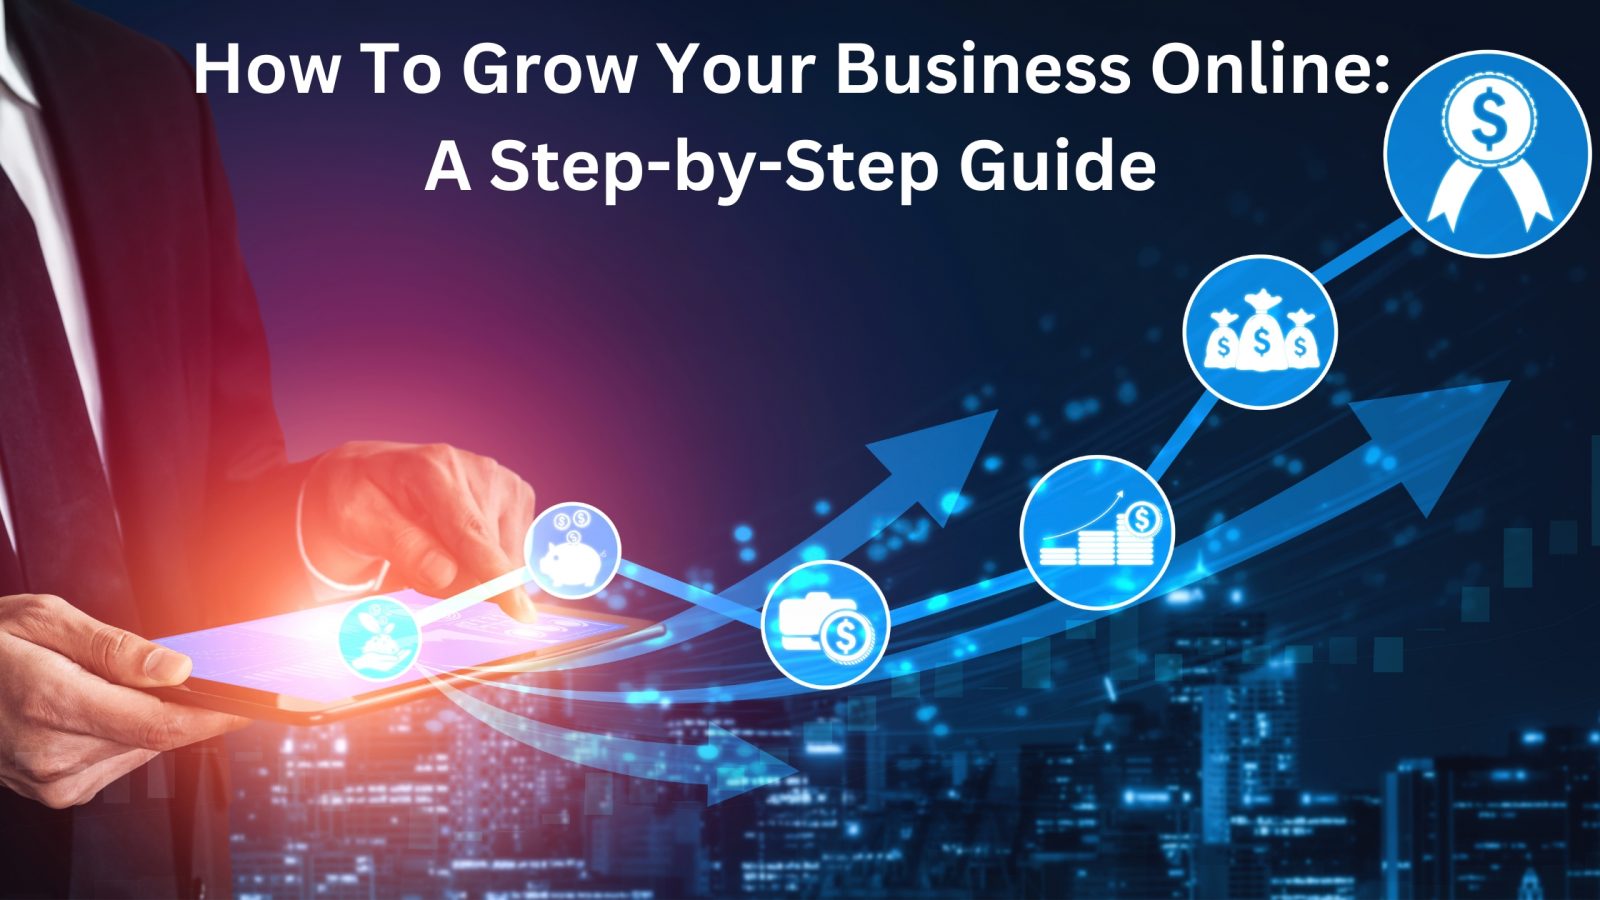 How To Grow Your Business Online: A Step-by-Step Guide